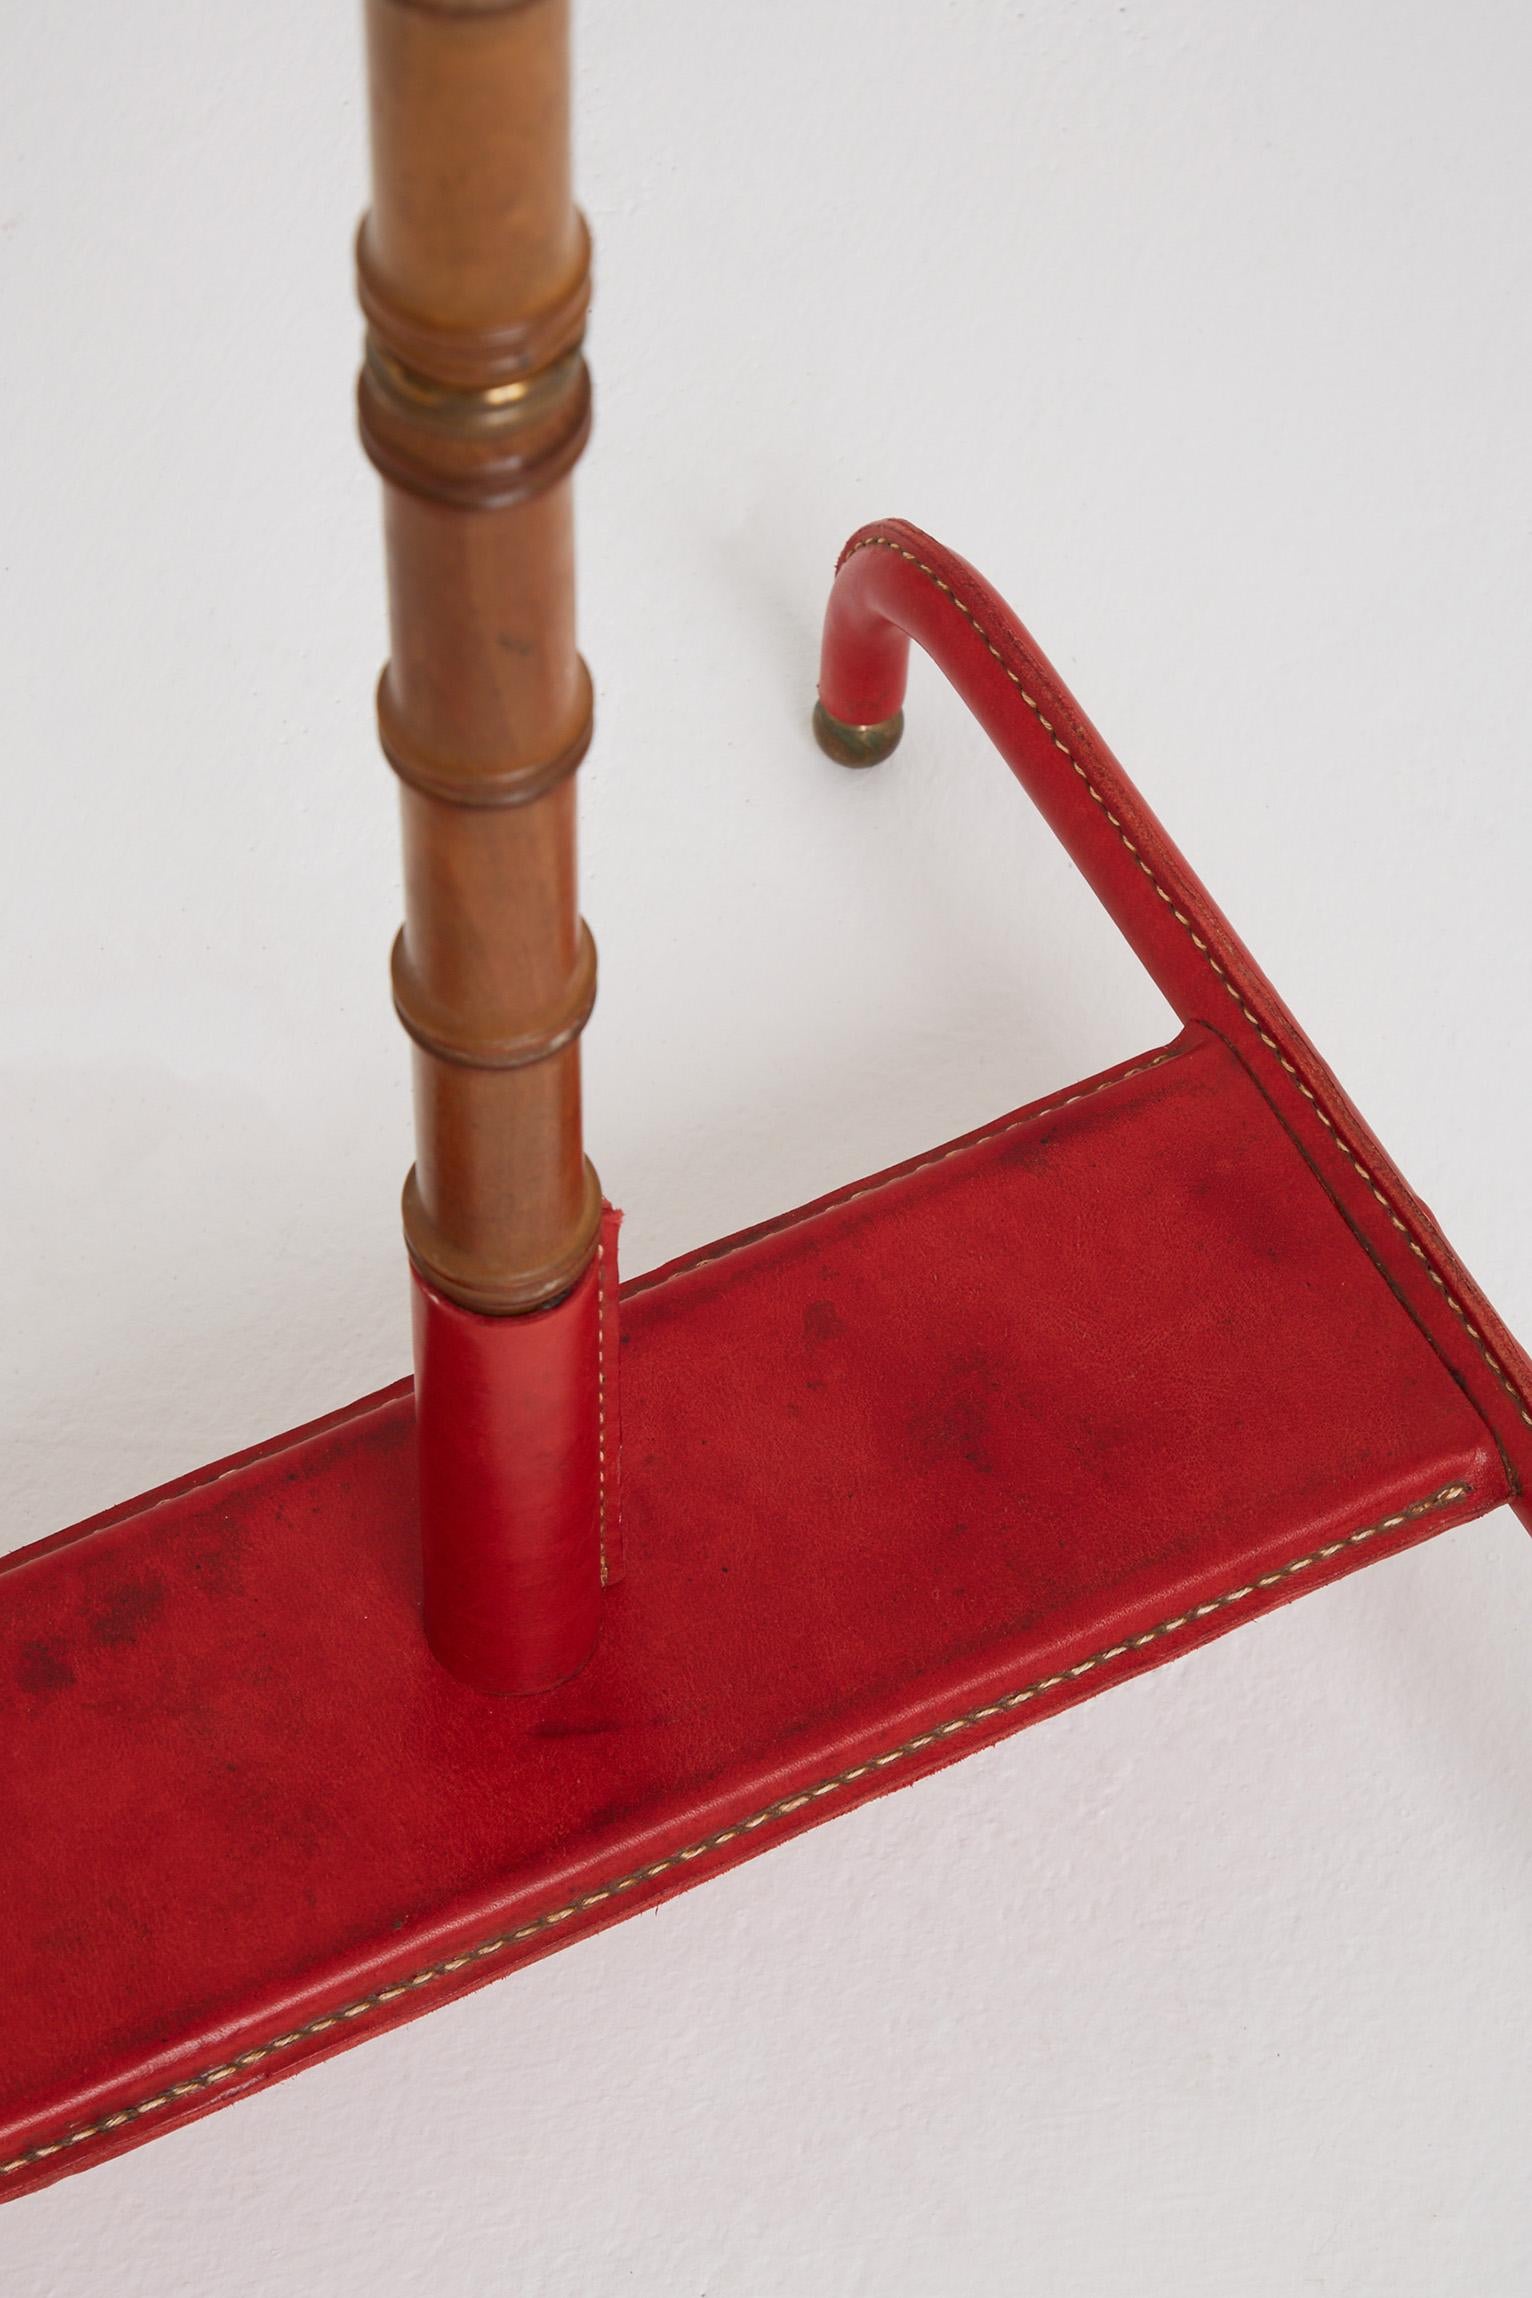 French Red Leather Valet by Jacques Adnet (1900-1984)